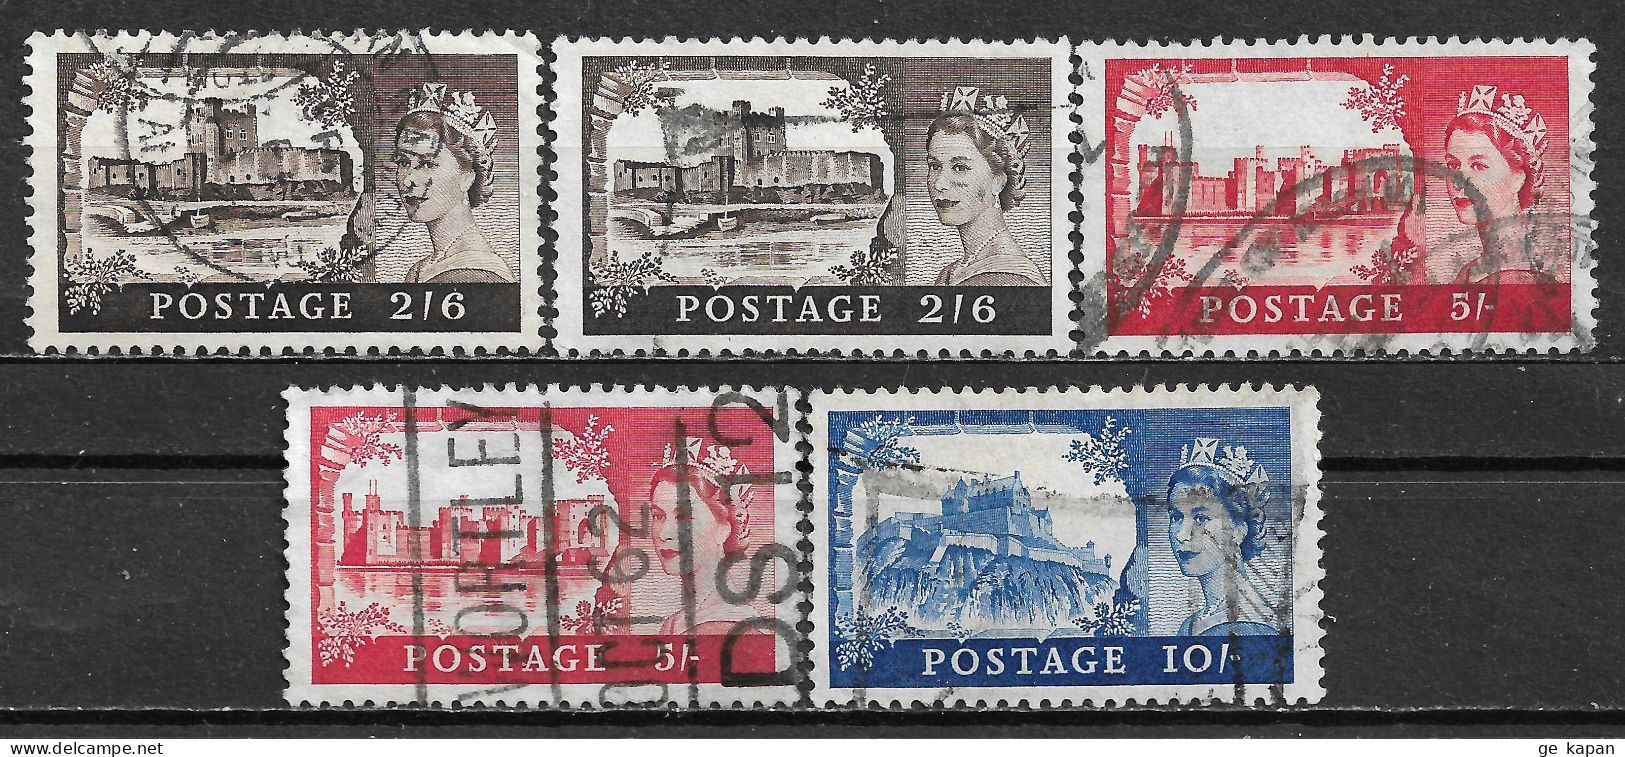 1959 GREAT BRITAIN SET OF 5 USED STAMPS (Scott # 371-373)  SCV $7.35 - Used Stamps